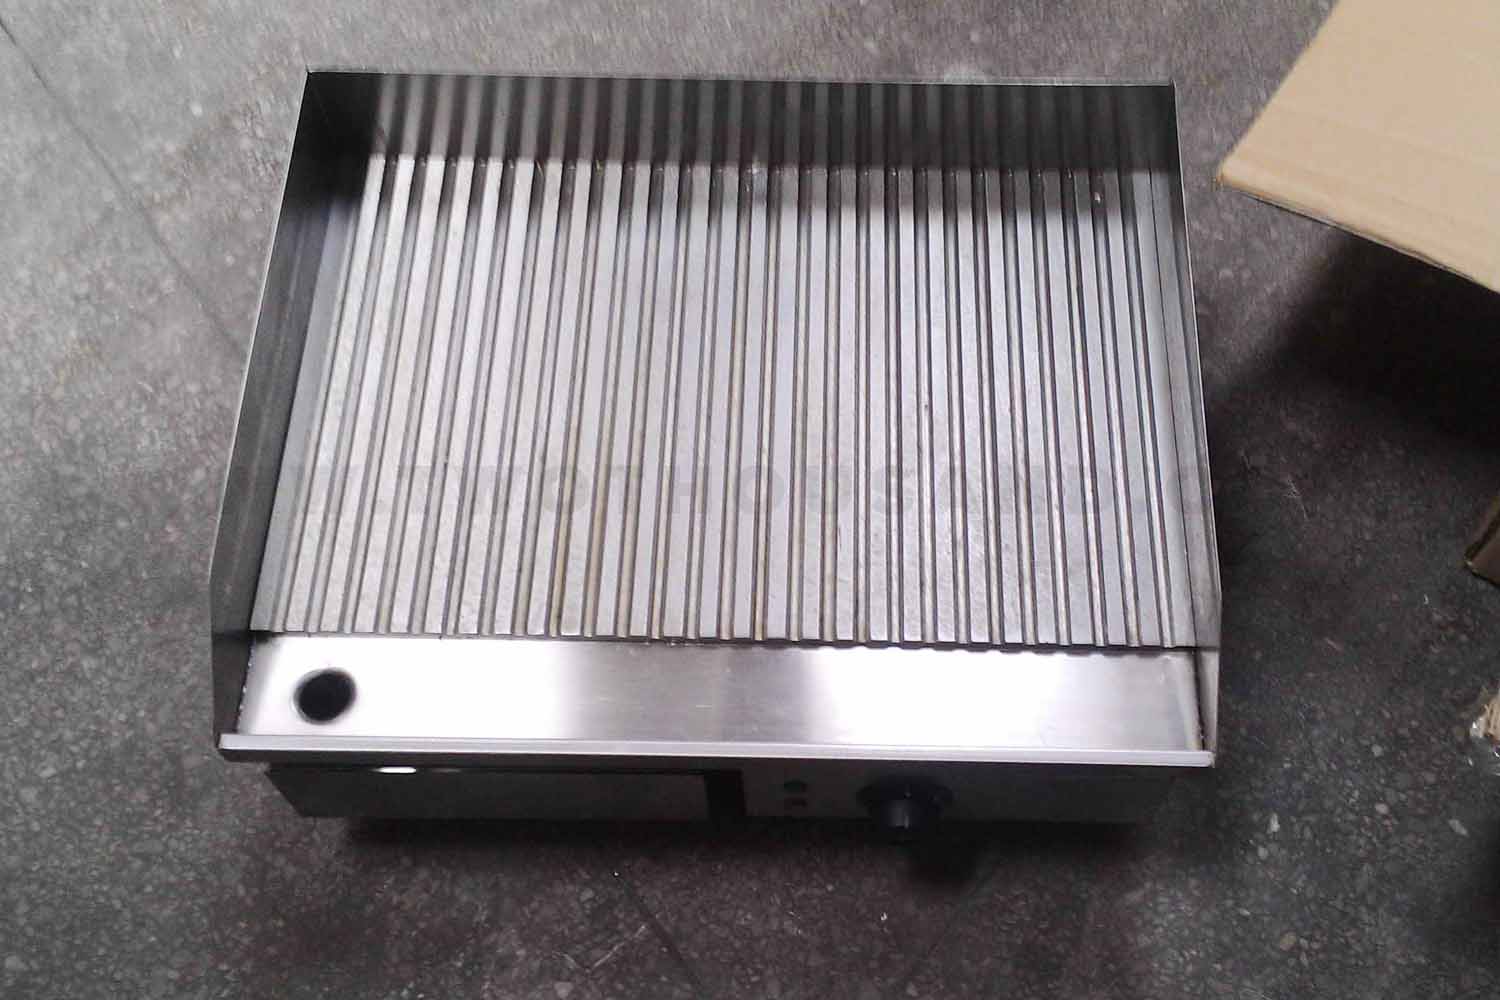 FROnT VIEW OF Electric Griddle